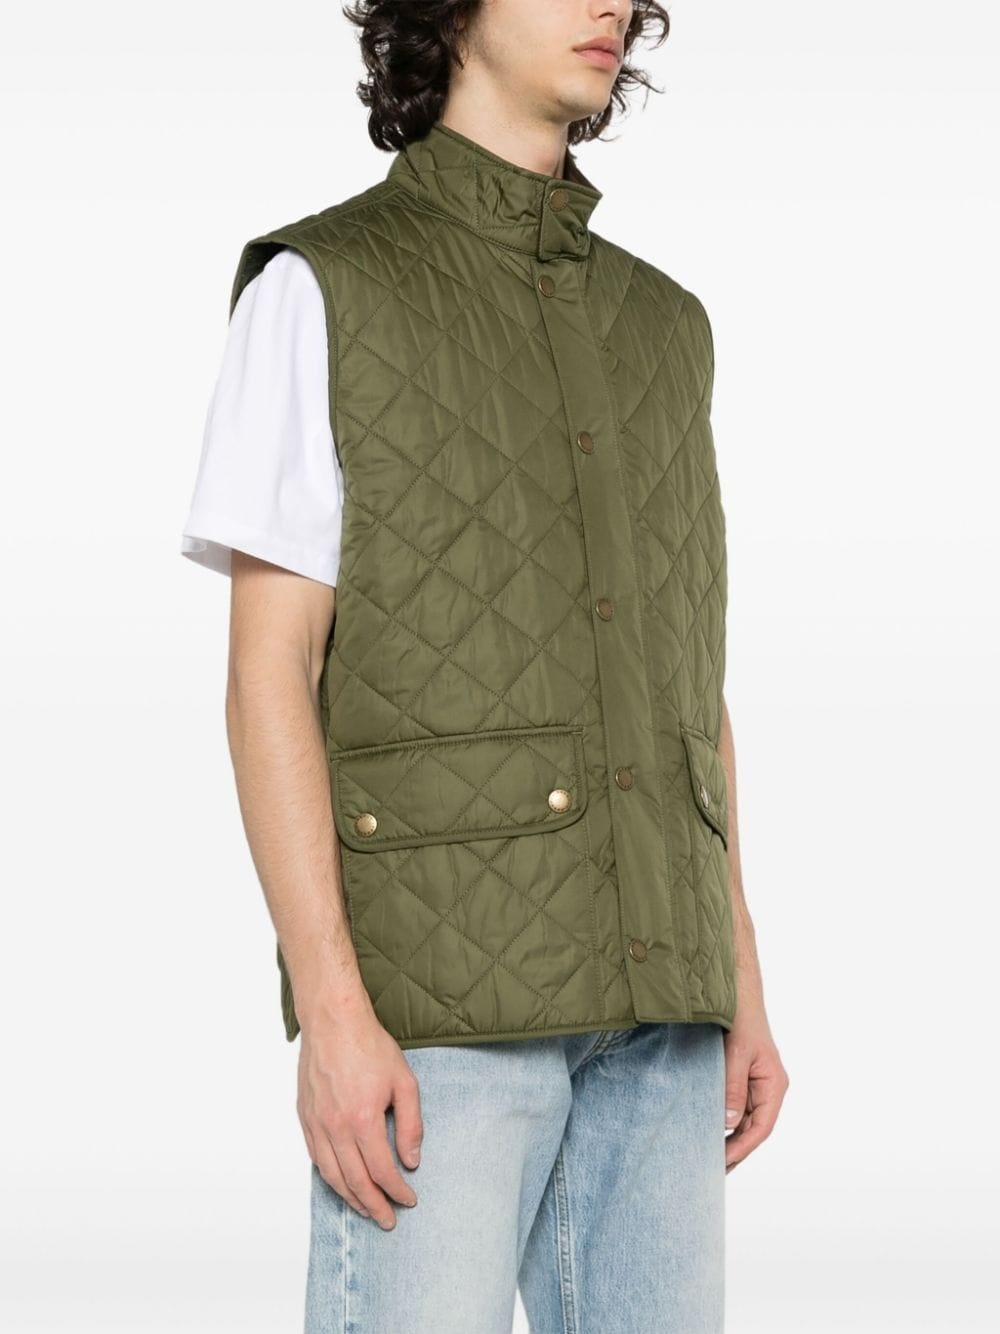 diamond-quilted logo-embroidered gilet - 3